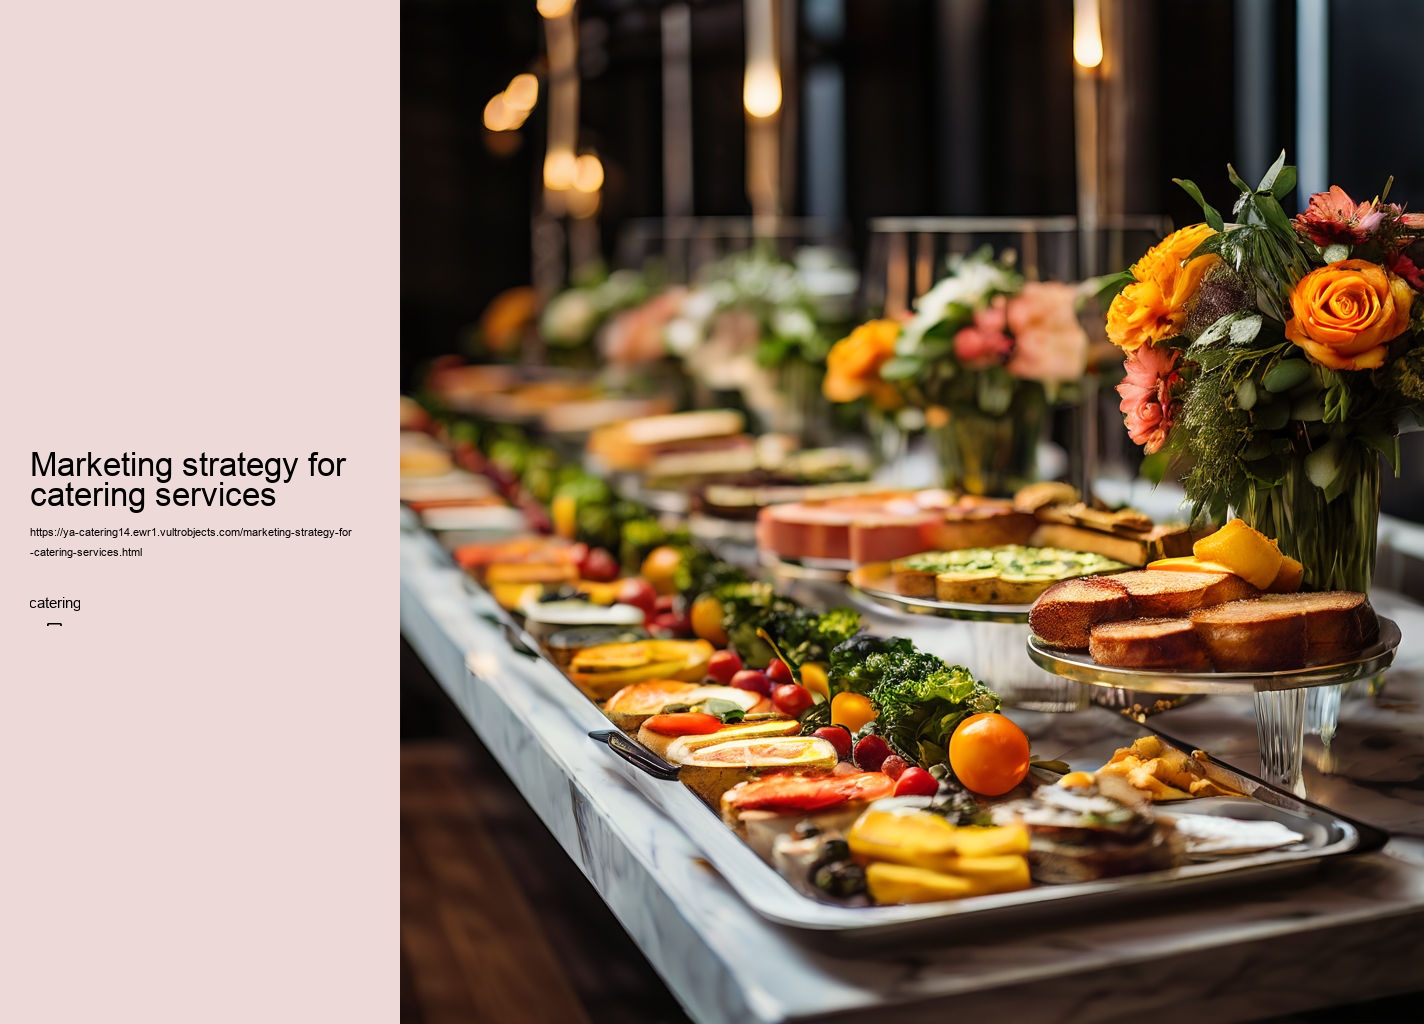 Marketing strategy for catering services